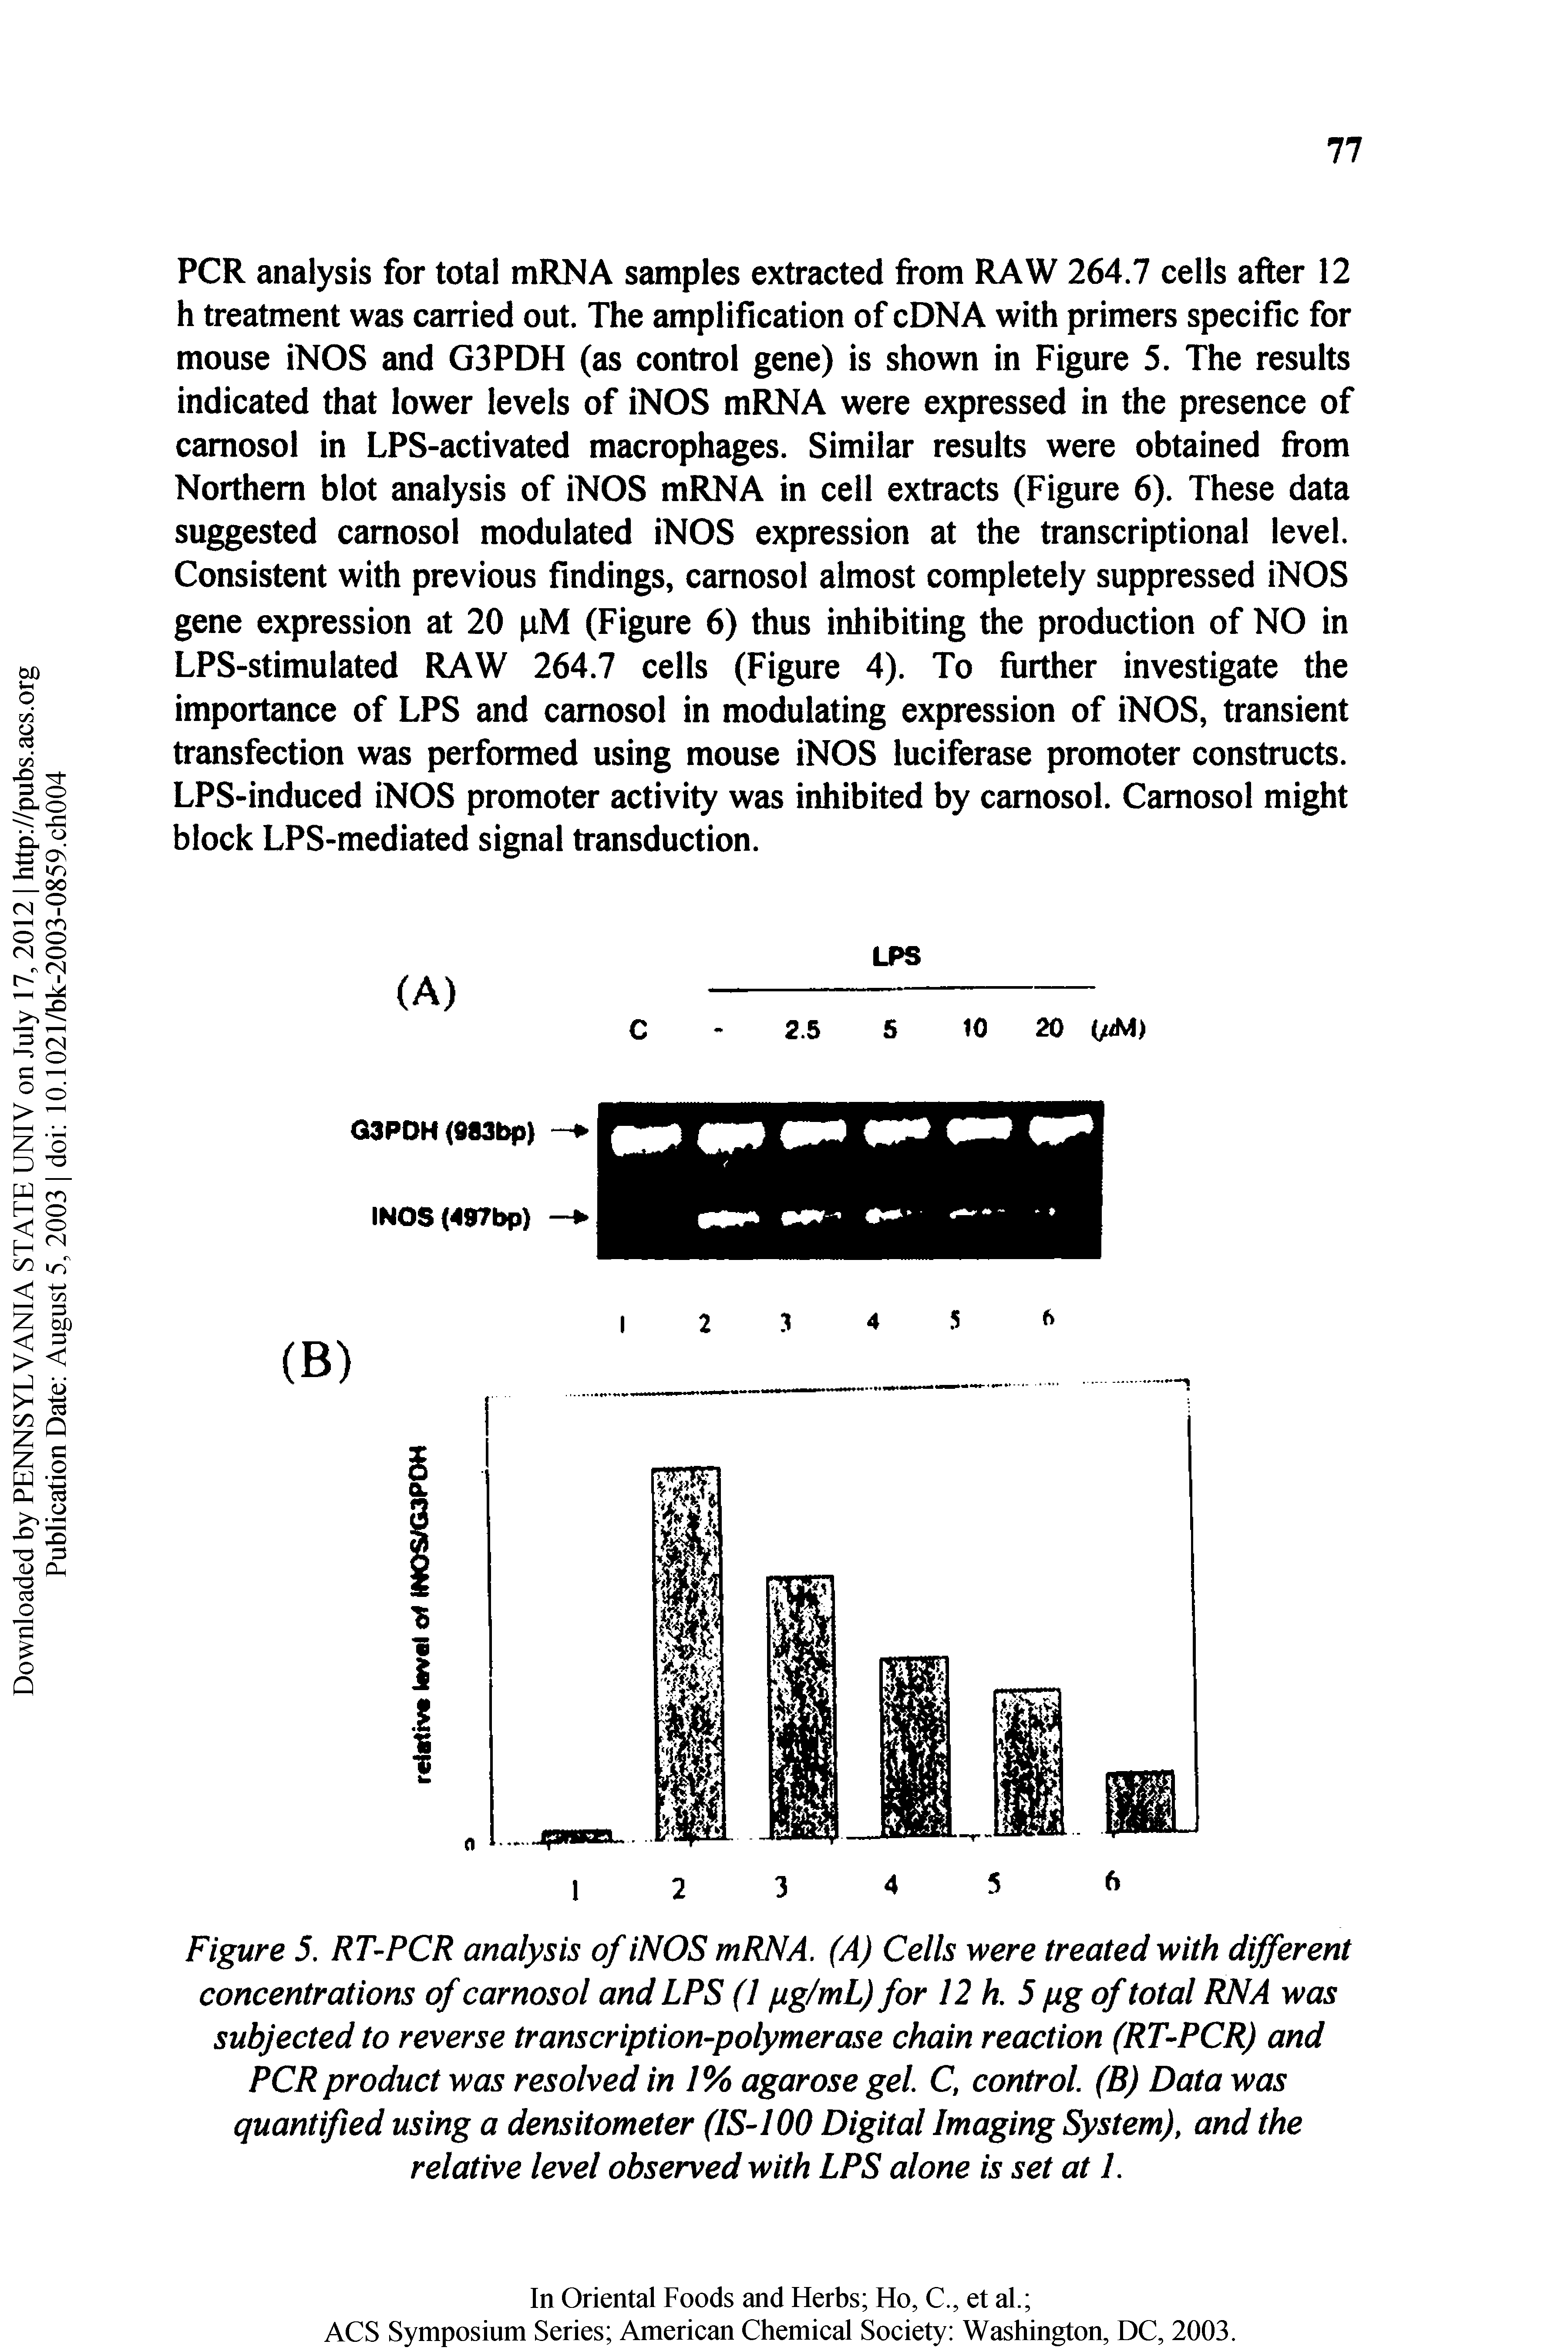 Figure 5, RT-PCR analysis of iNOS mRNA. (A) Cells were treated with different concentrations of camosol and LPS (I ptg/mL) for 12 h. 5 fig of total RNA was subjected to reverse transcription-polymerase chain reaction (RT-PCR) and PCR product was resolved in 1% agarose gel C, control (B) Data was quantified using a densitometer (IS-100 Digital Imaging System), and the relative level observed with LPS alone is set at 1.